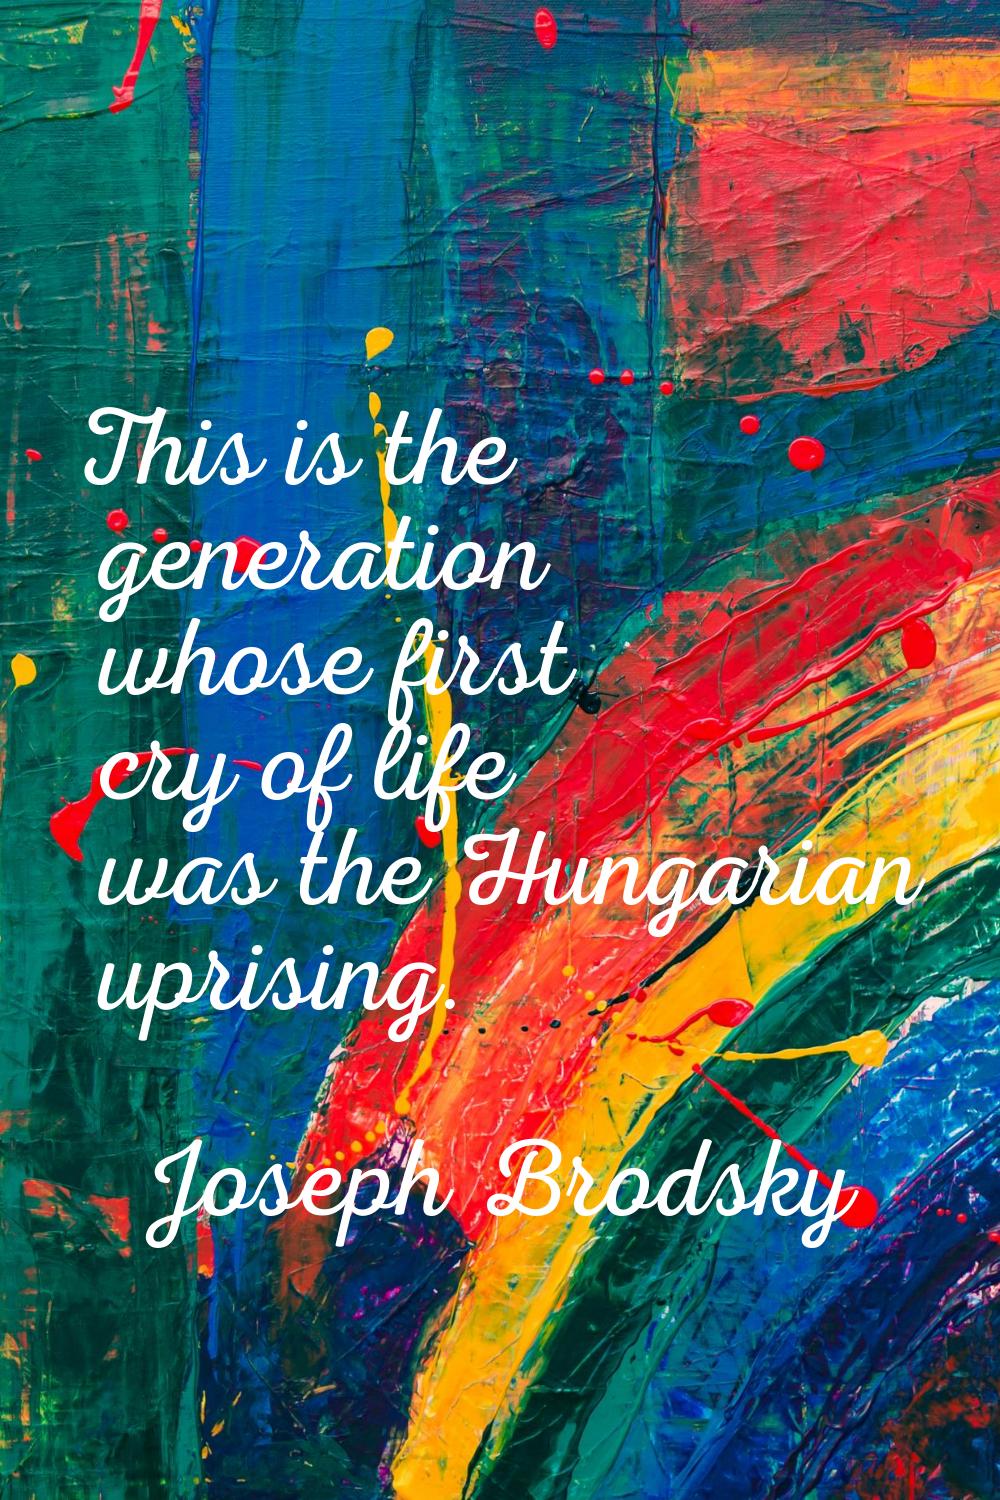 This is the generation whose first cry of life was the Hungarian uprising.